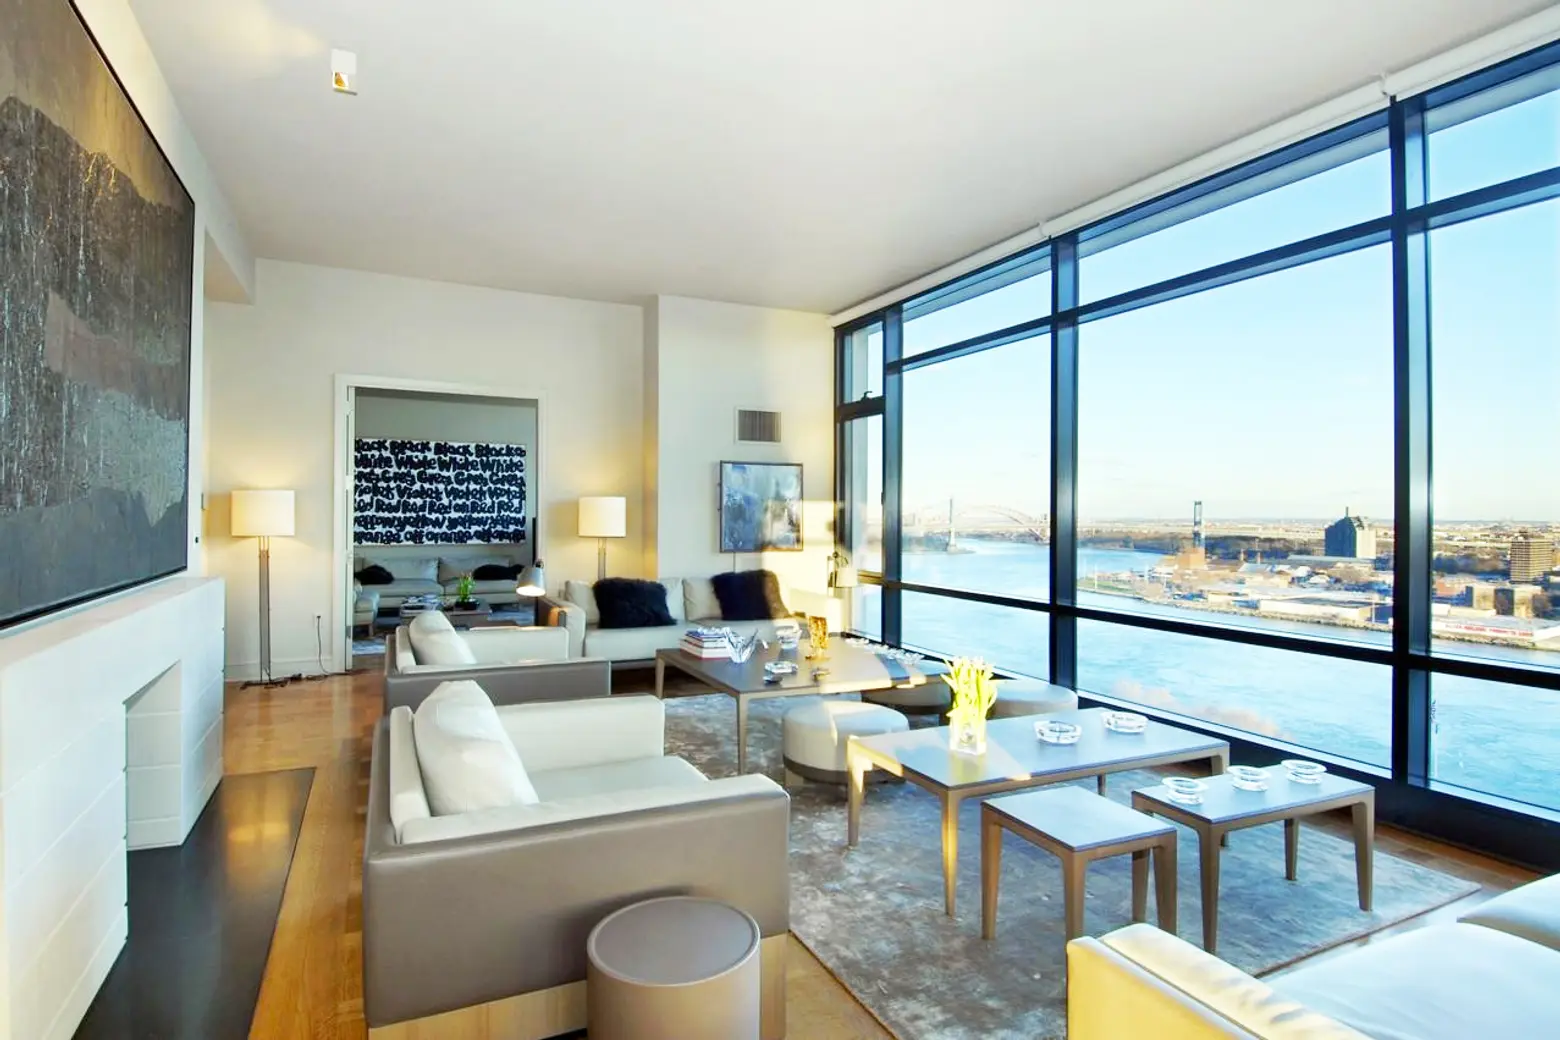 UES Penthouse with East River Views in Every Room Sells for $14.9 Million to Former Presidential Hopeful